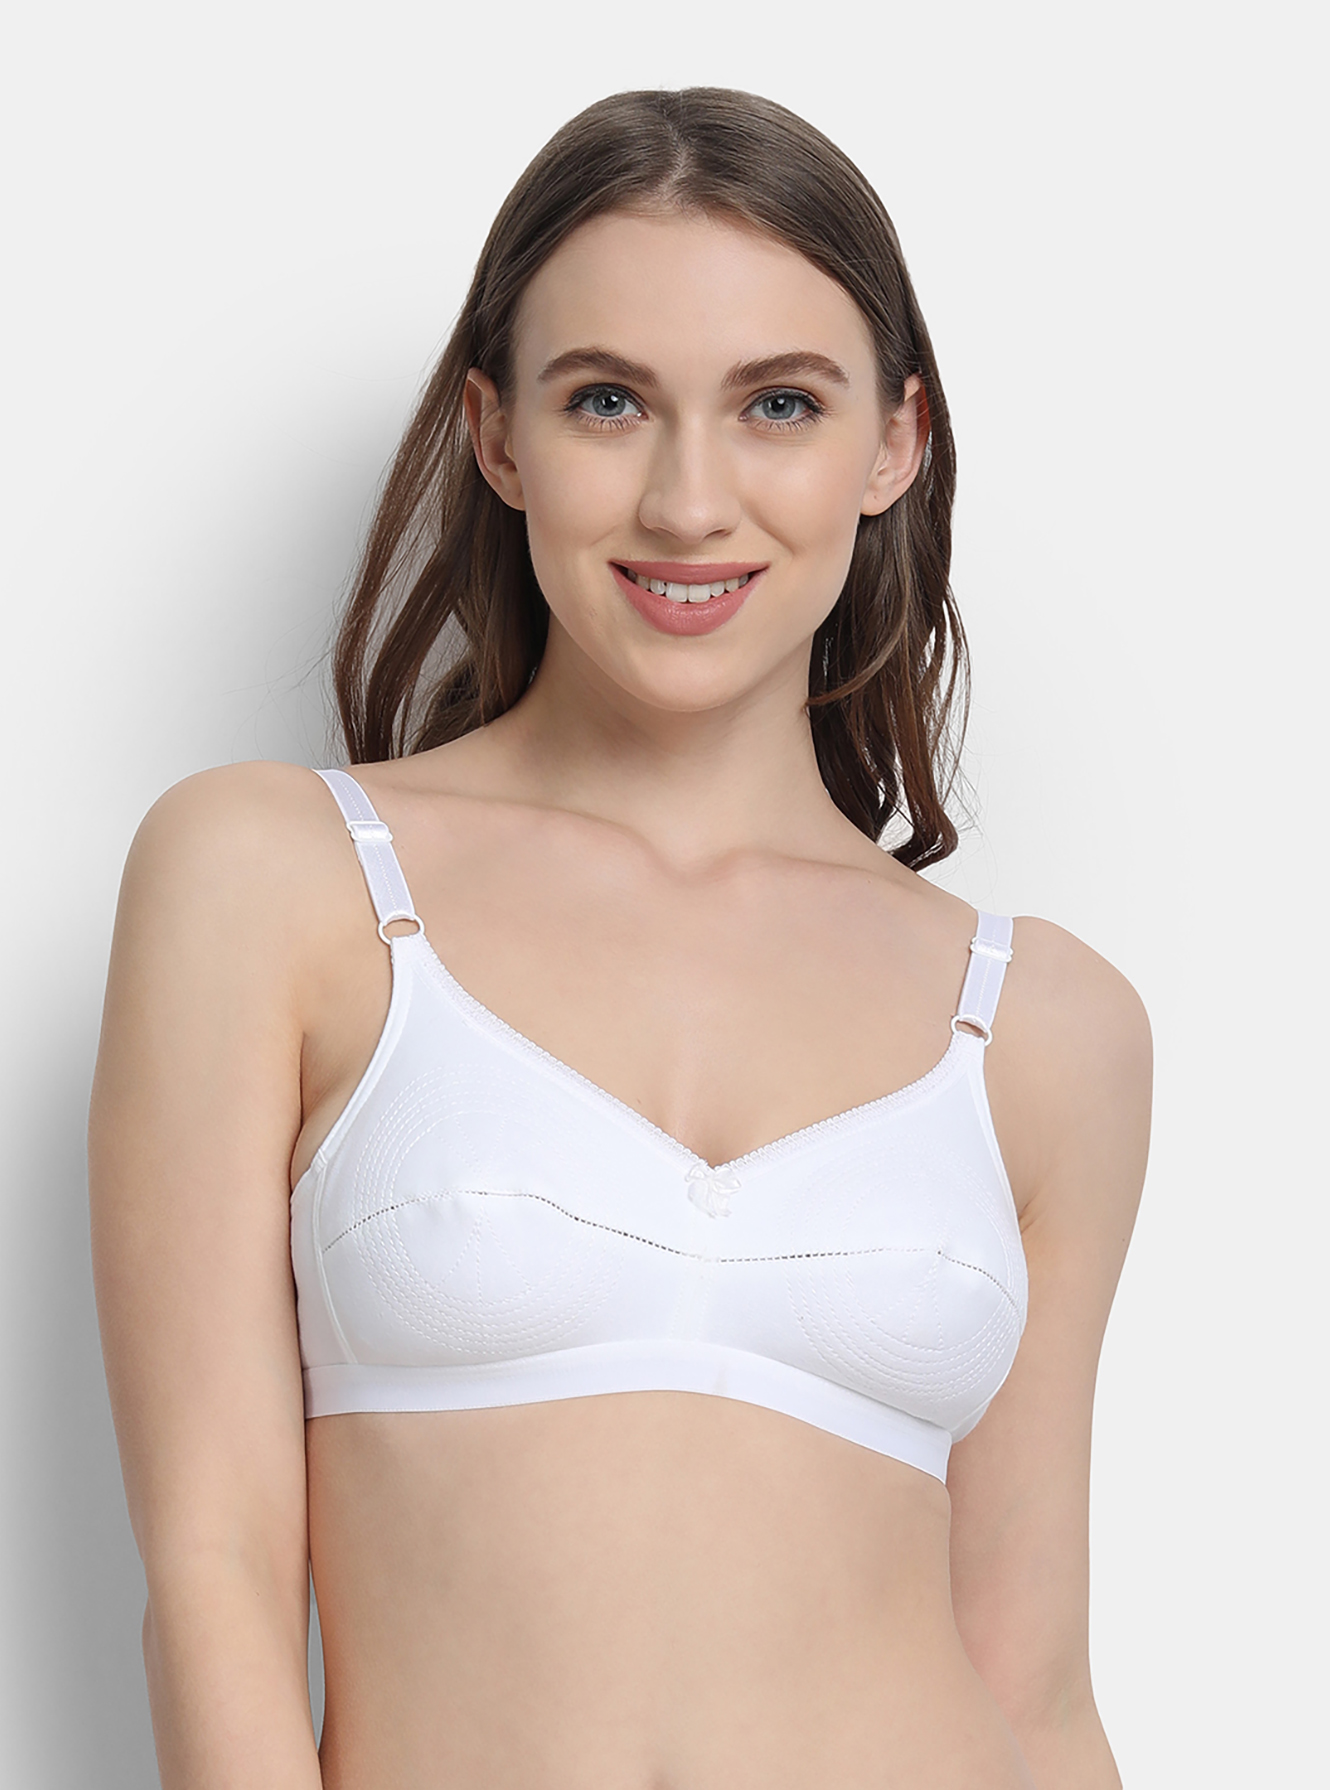 Miss-T Bra, Groversons, Lingerie Products